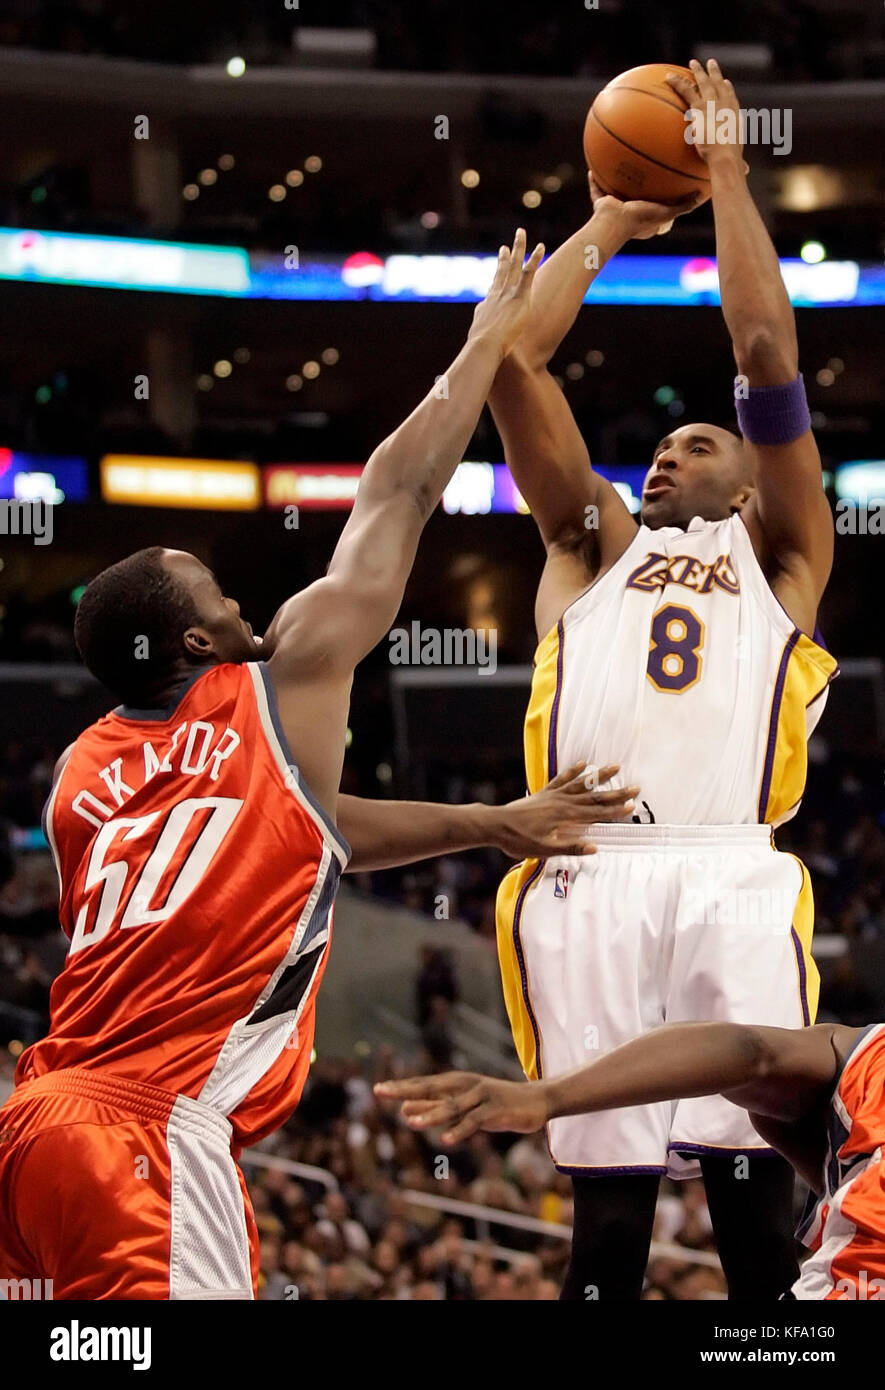 Los Angeles Lakers' Kobe Bryant (8) shoots over Charlotte Bobcats' Emeka Okafor in the fourth quarter in Los Angeles on Sunday Dec. 4, 2005. Photo by Francis Specker Stock Photo